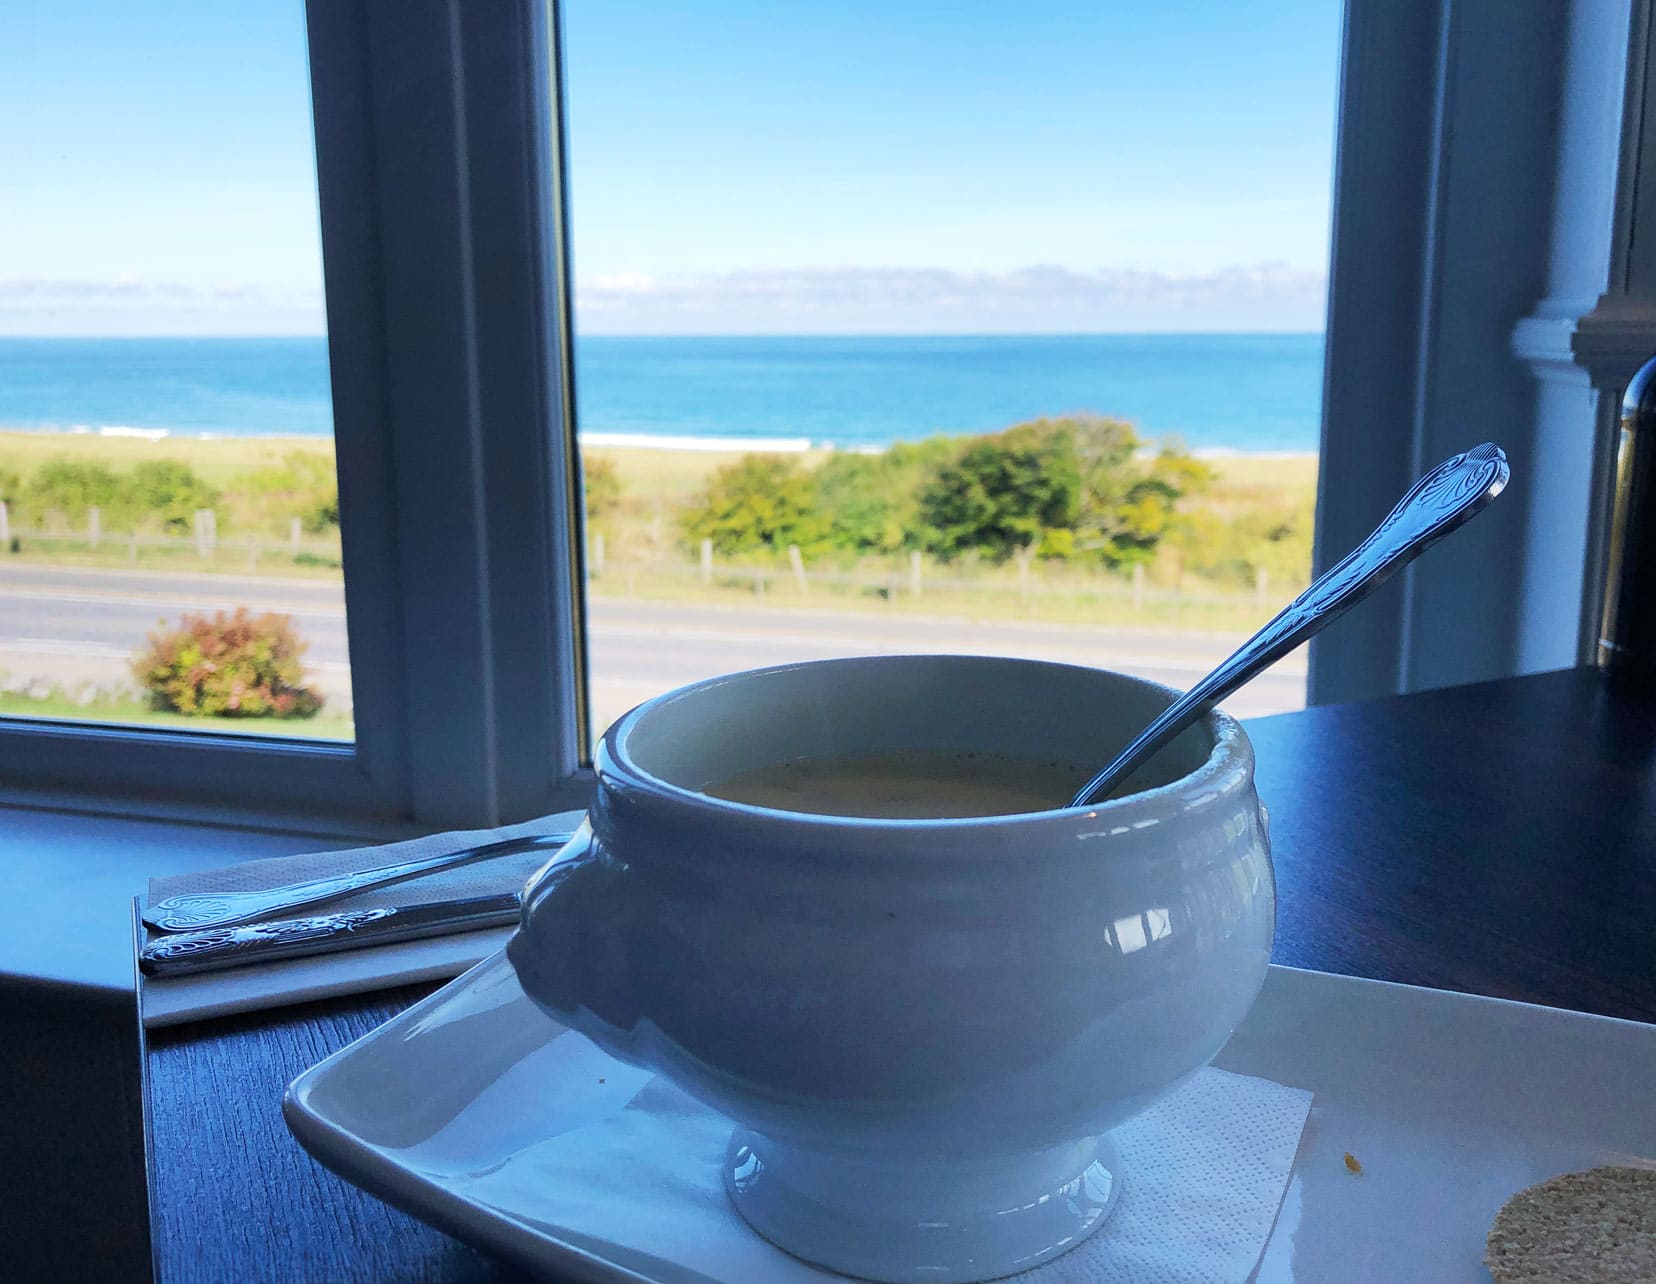 White soup bowl full of Cullen Skink with a back drop of a window with a sea view